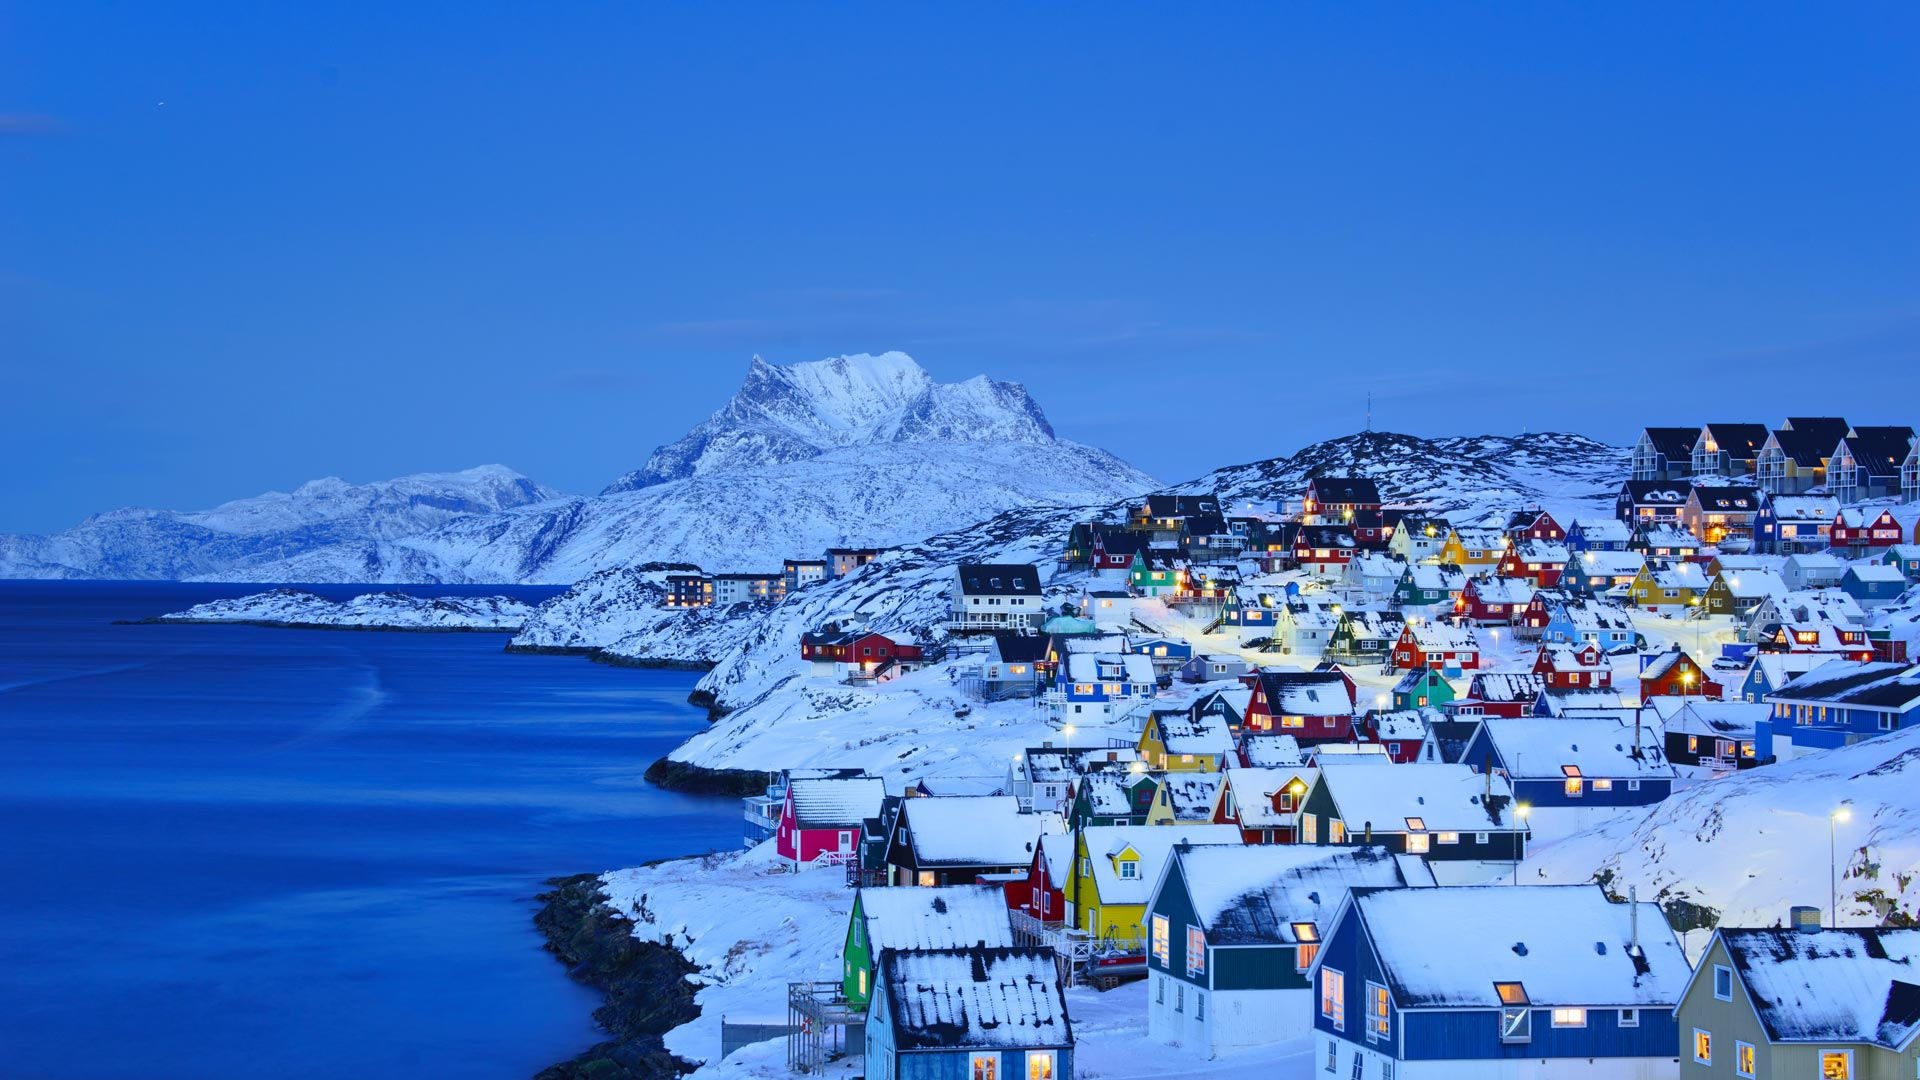 Greenland: Nuuk, The Norwegian Erik the Red visited the island in 982. 1920x1080 Full HD Wallpaper.